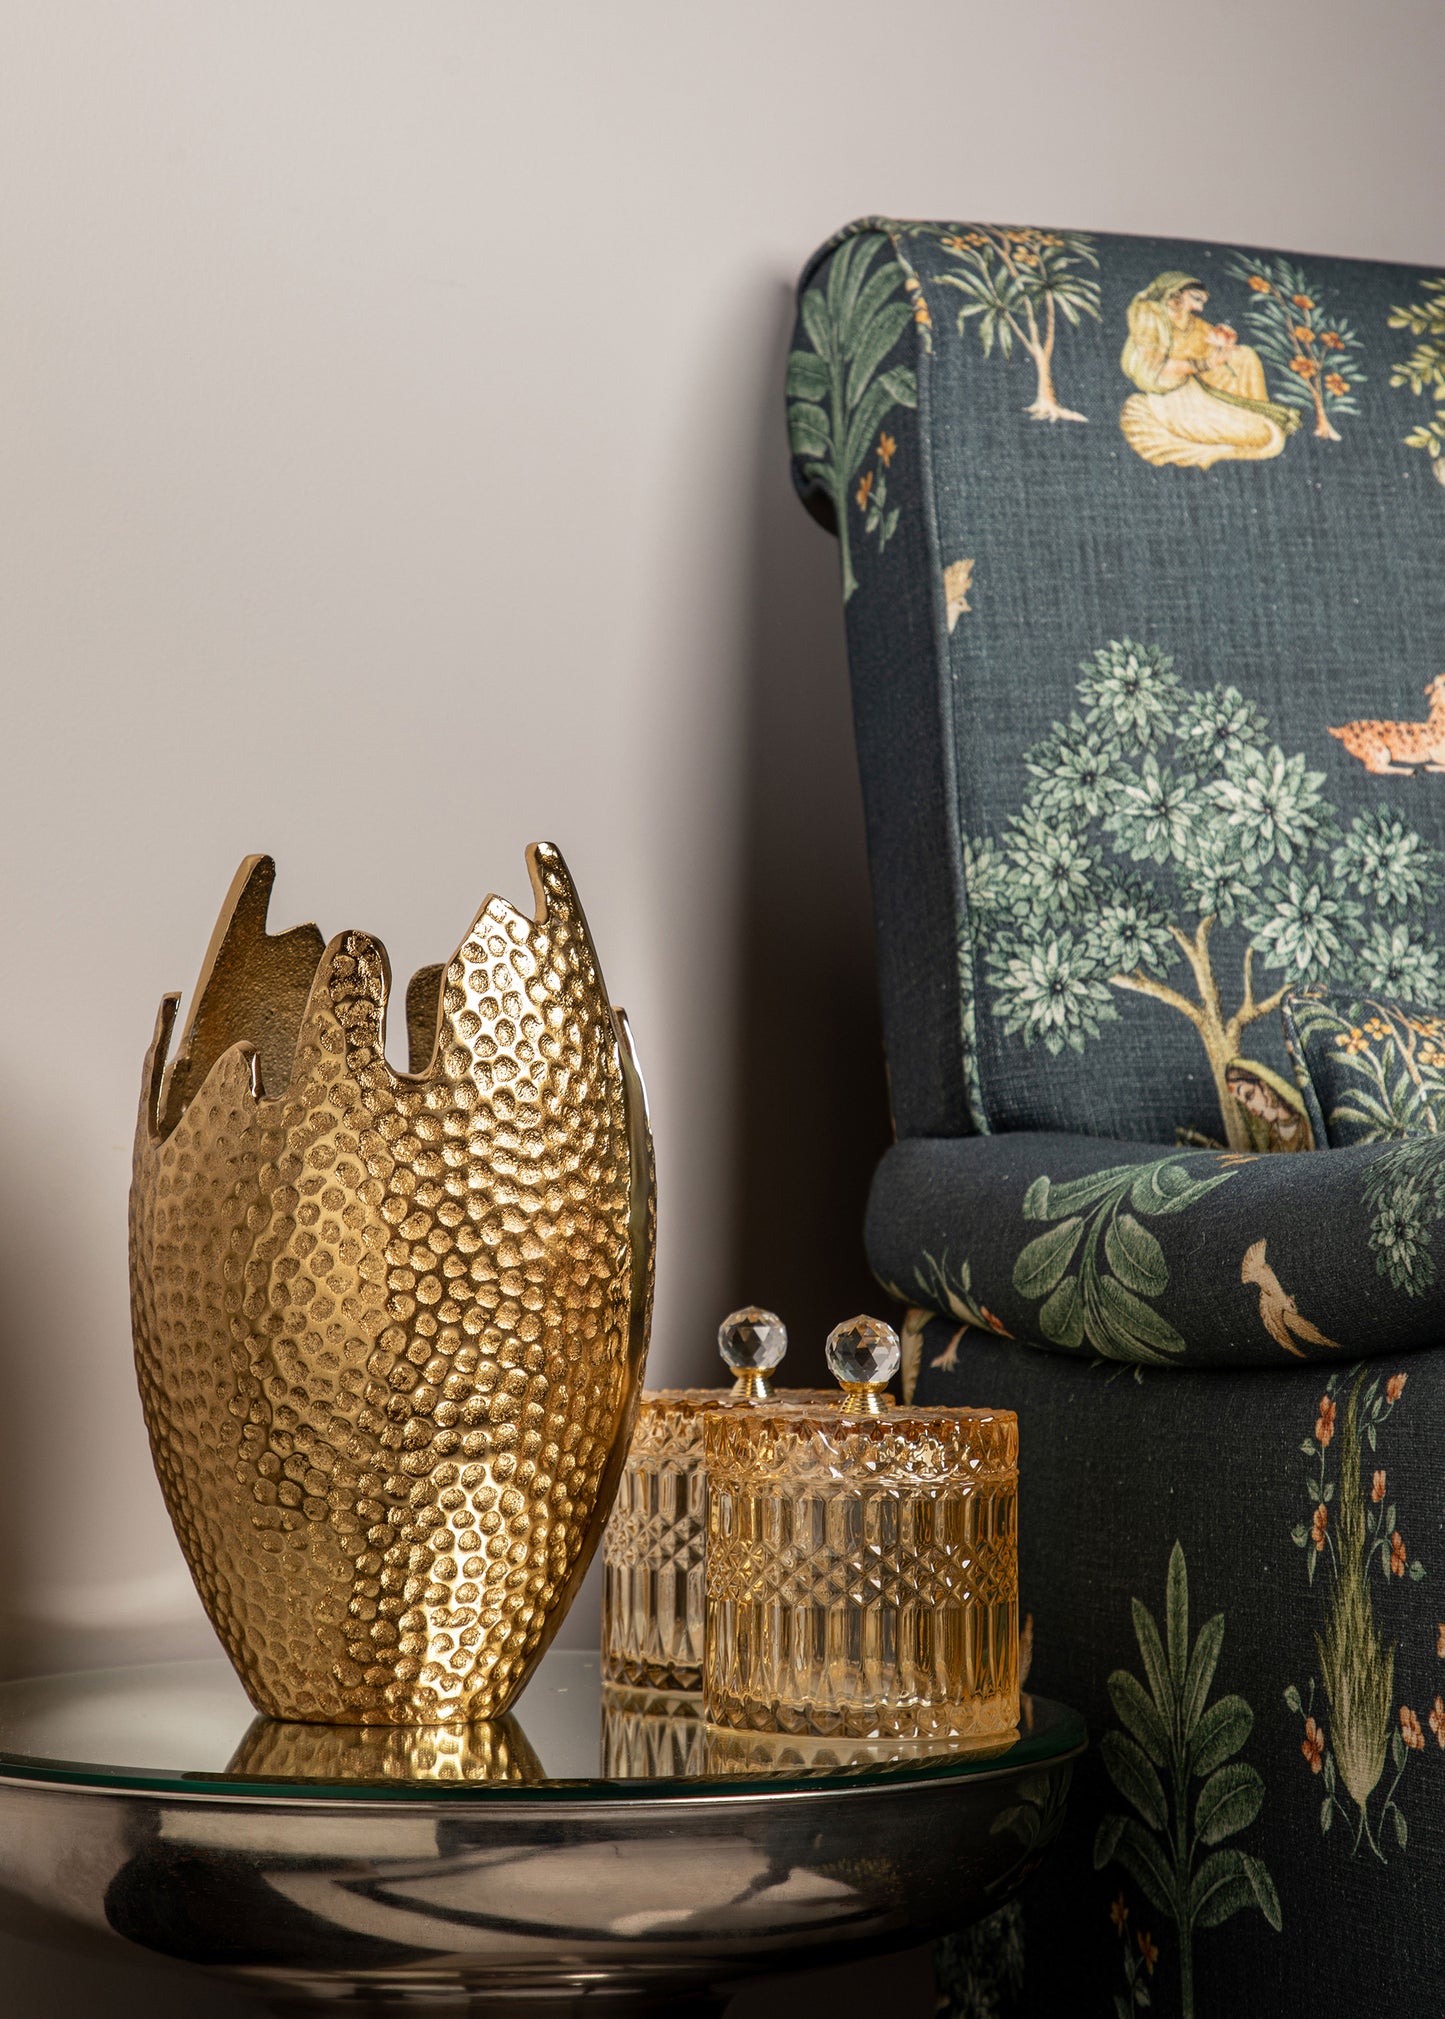 The Brass Dotted Vase boasts a modern design with tiny brass dots that add a unique and captivating texture.